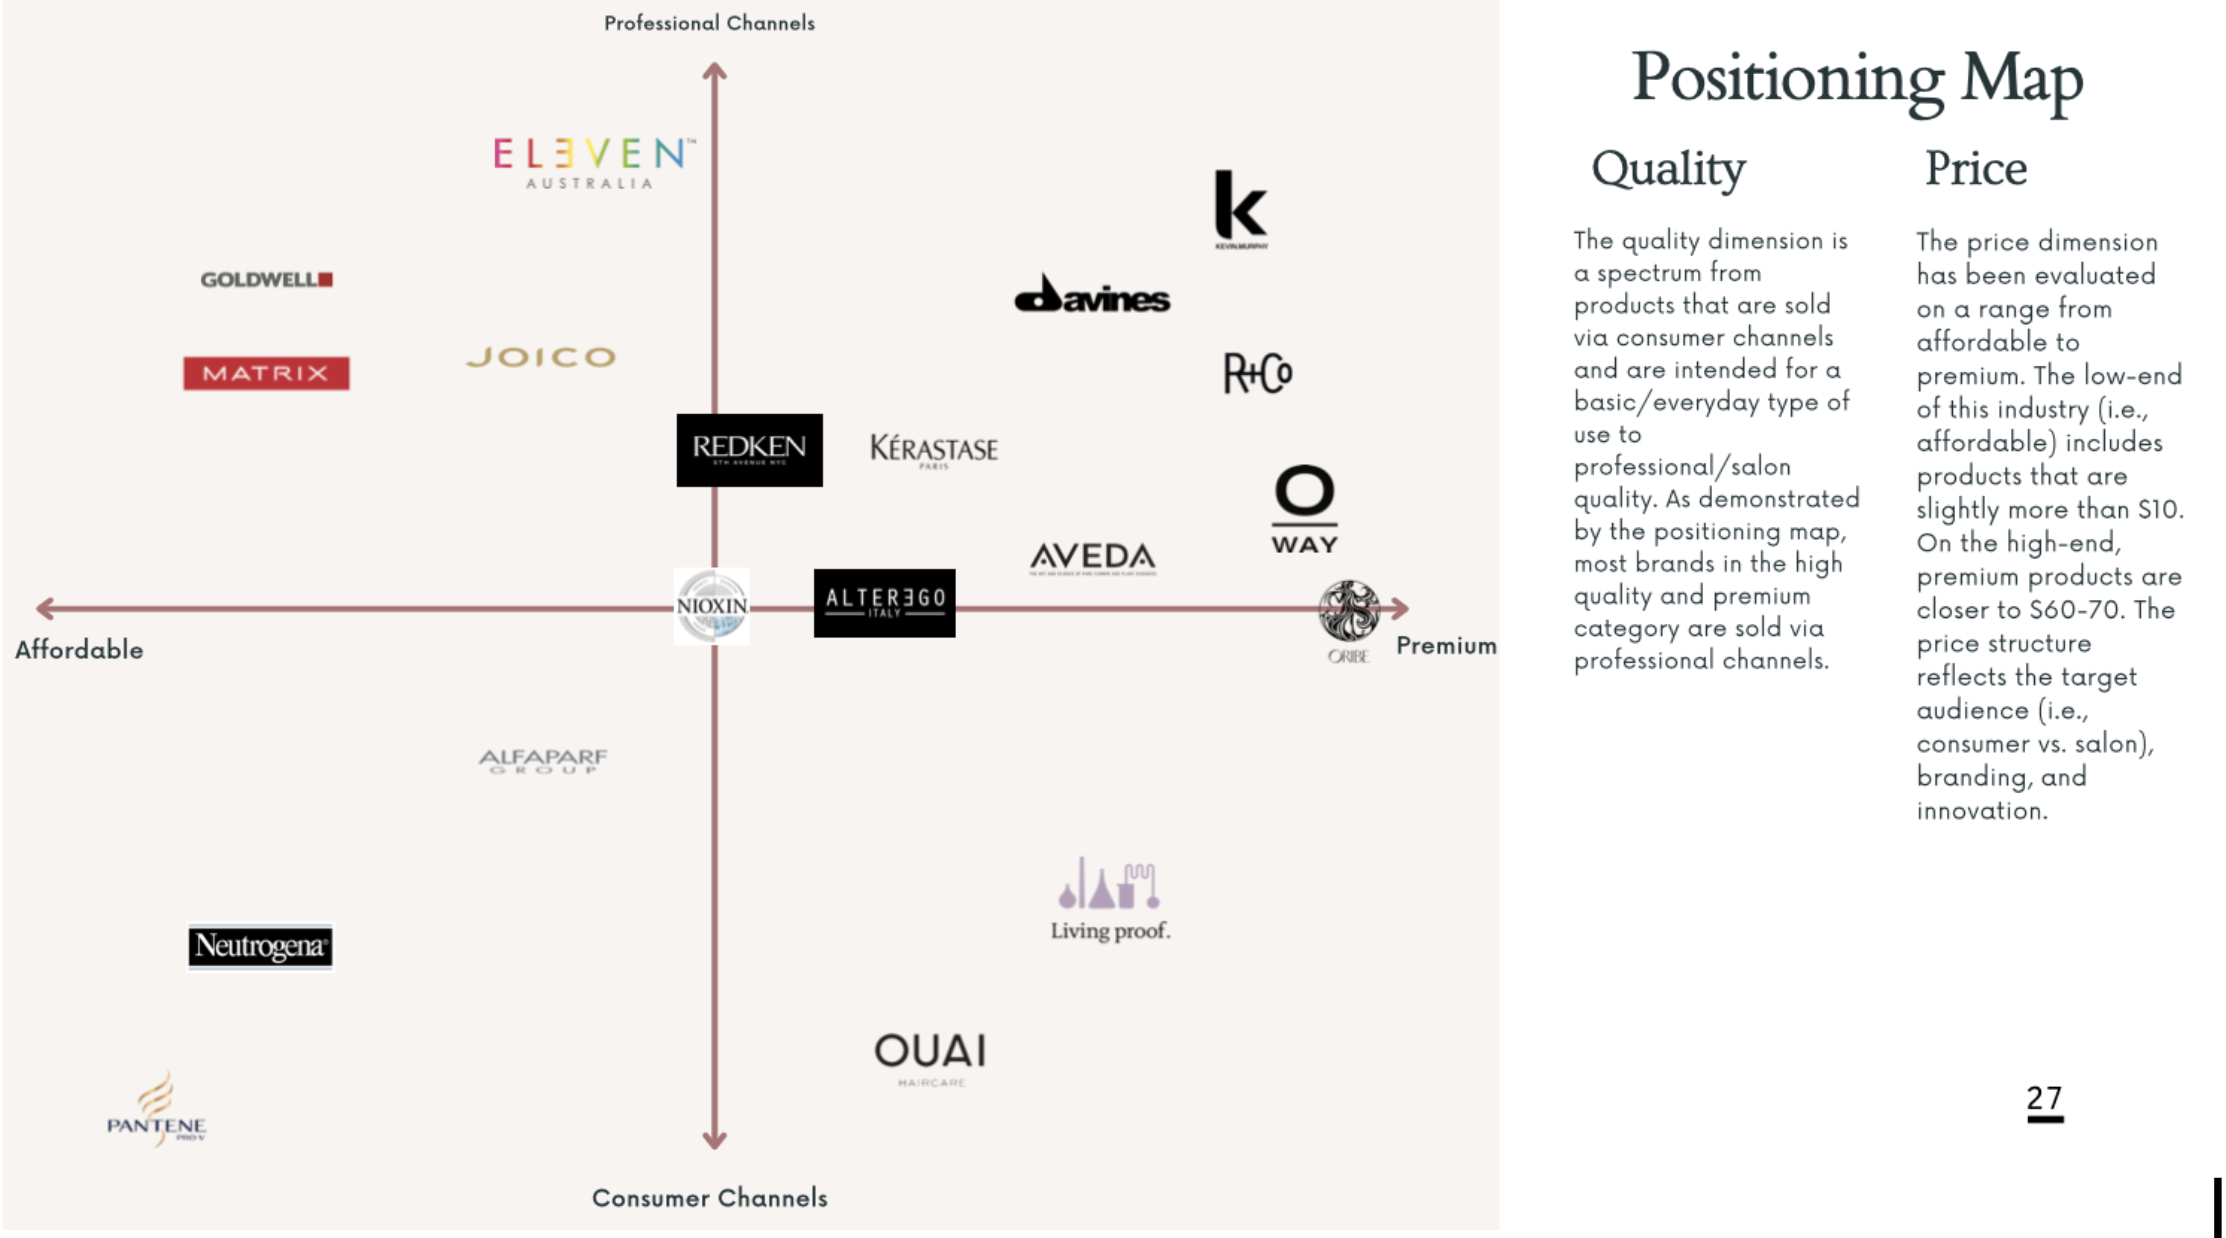 Deep-dive into customer feedback for 4 luxury brands